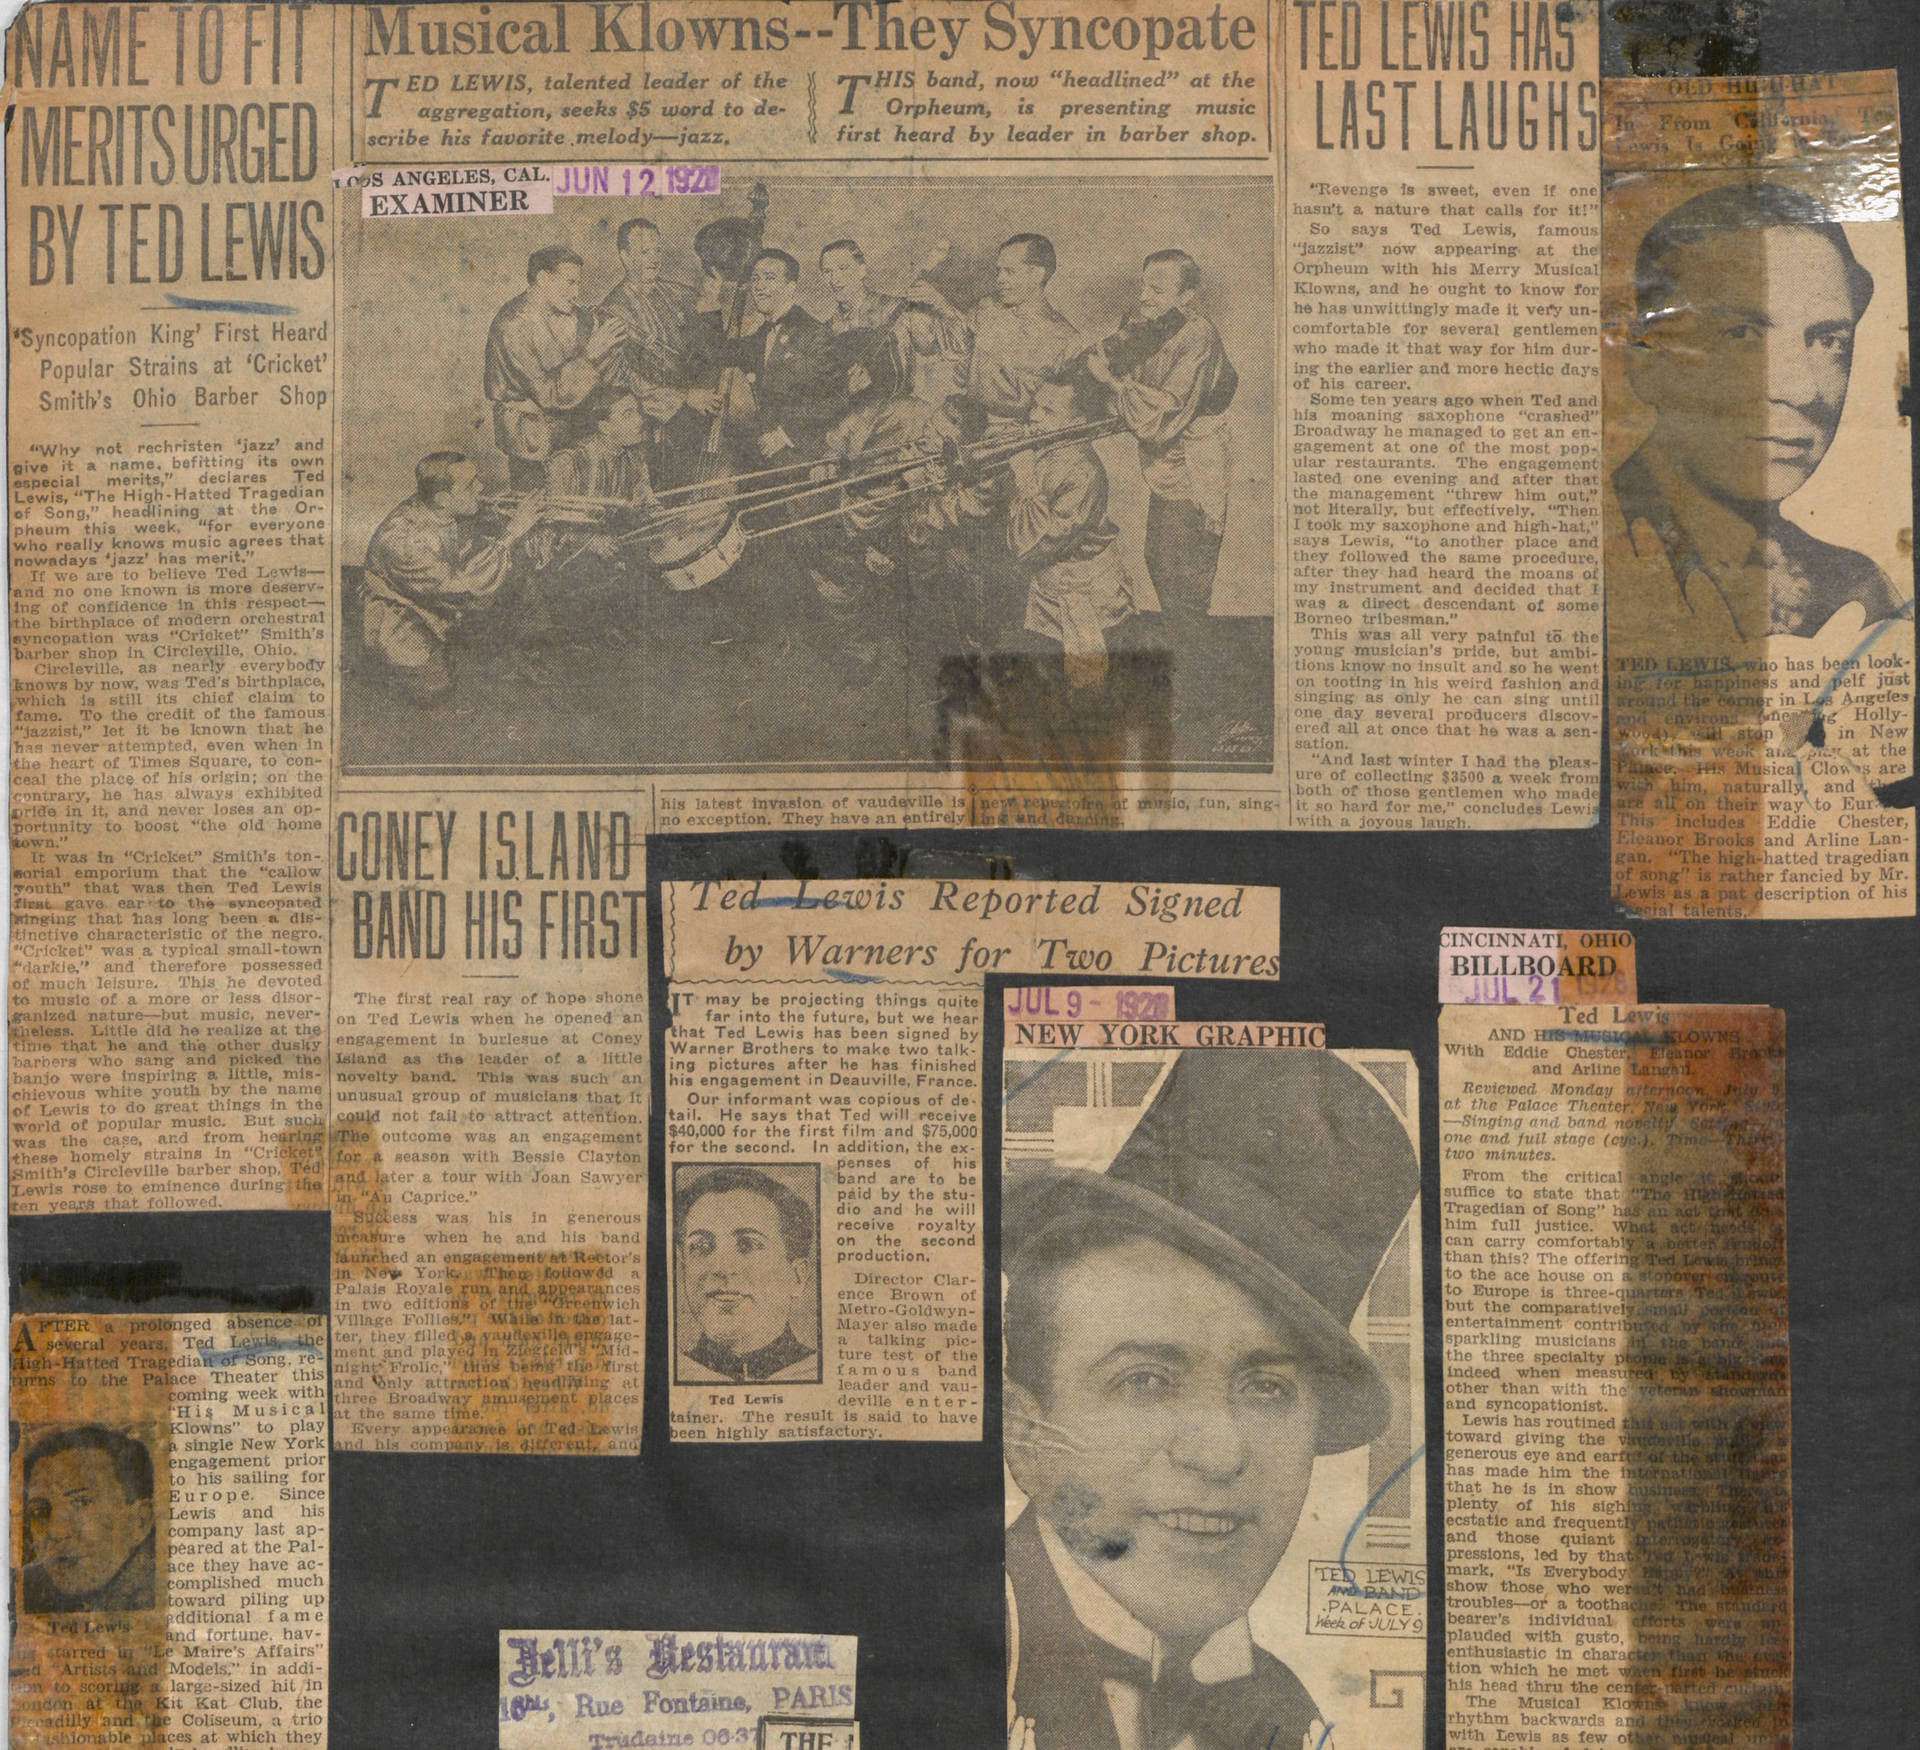 Ted Lewis Newspaper Art Collage Wallpaper